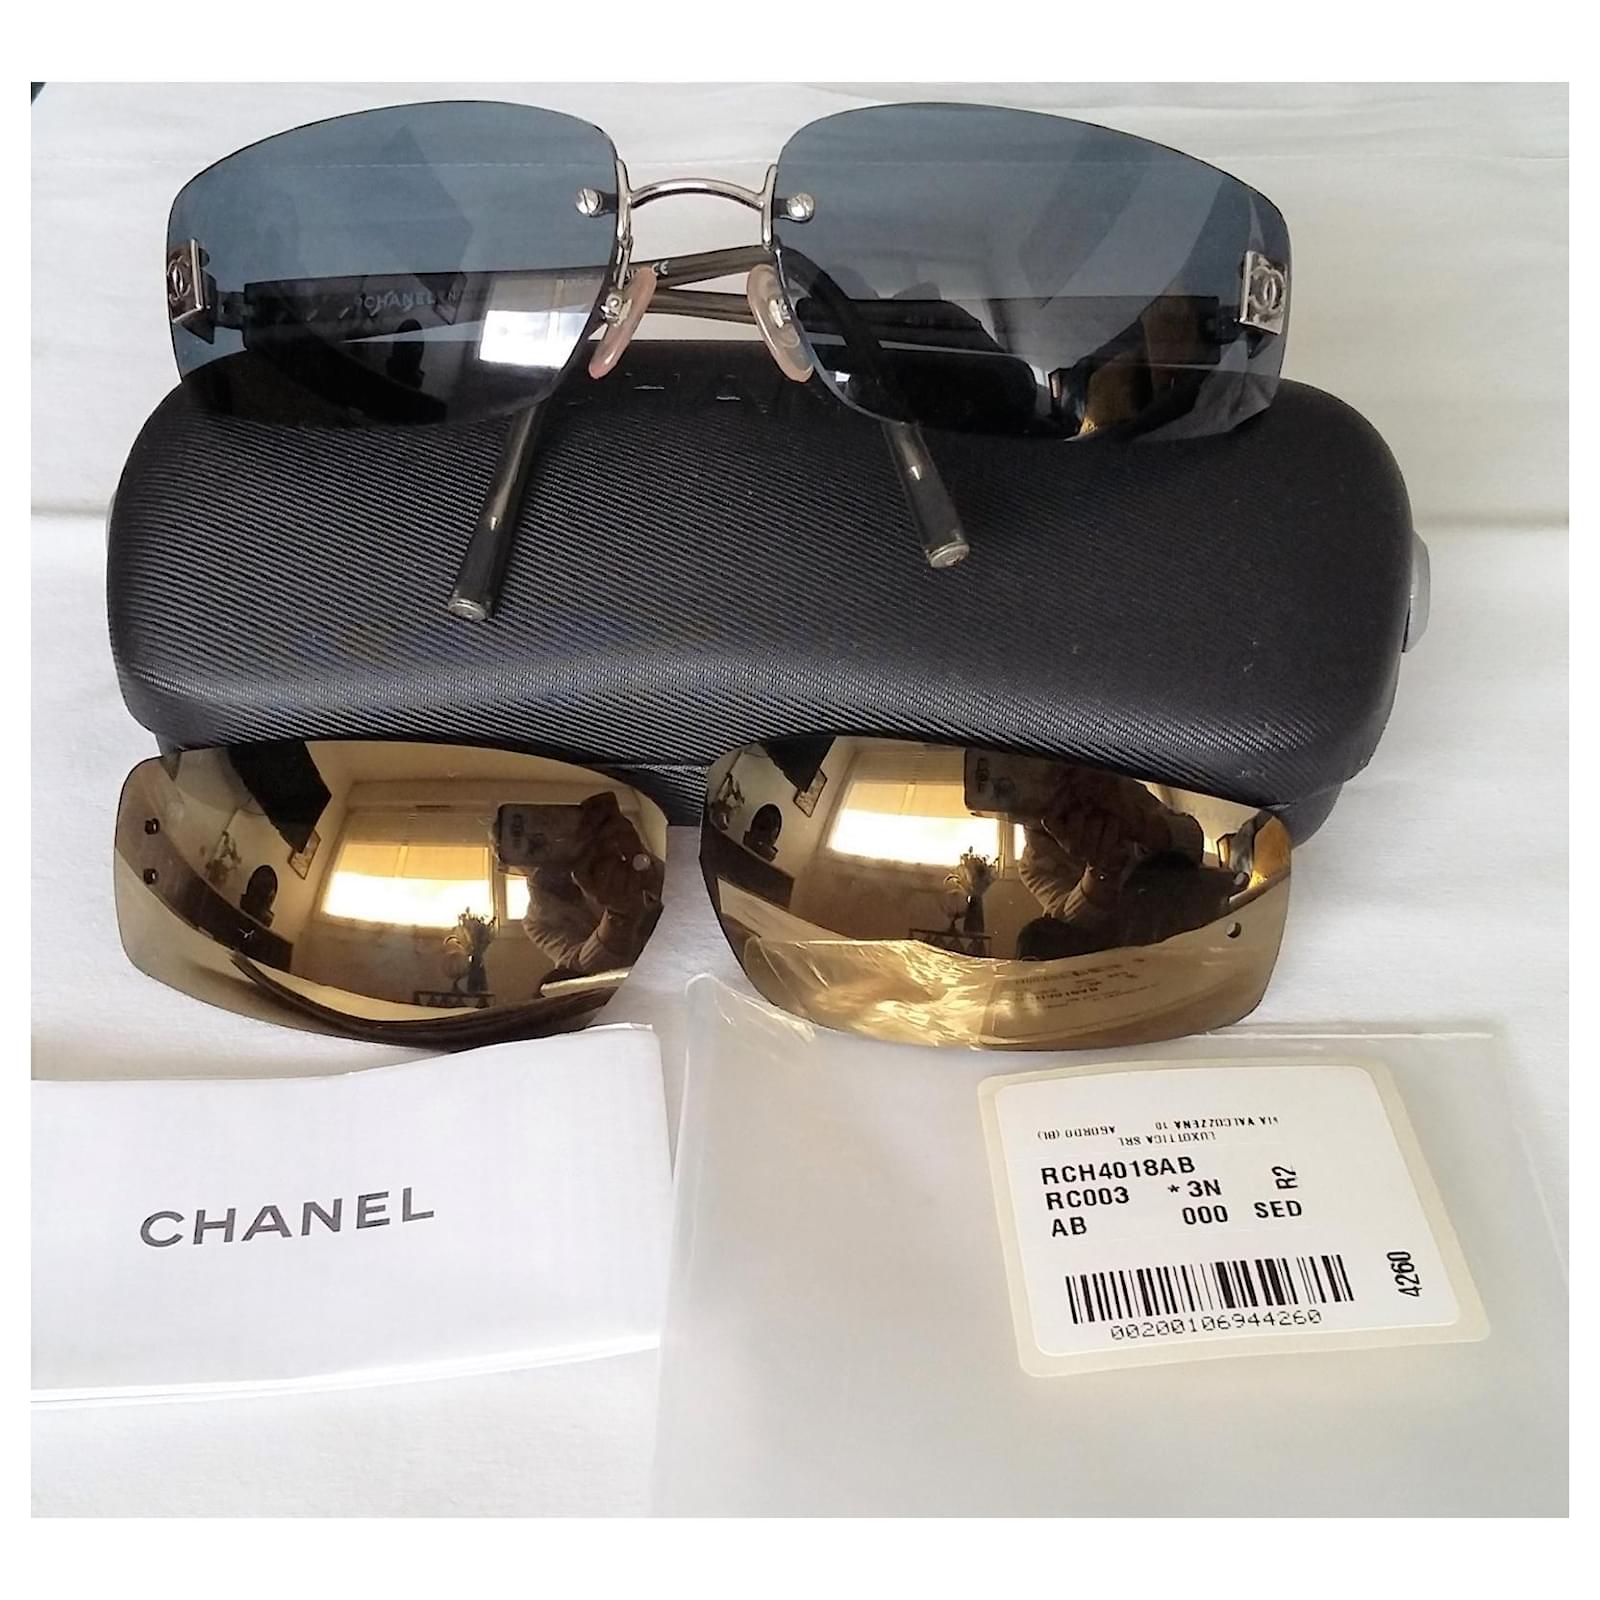 Vintage & New - Retro CHANEL sunglasses with 2 sets of glasses